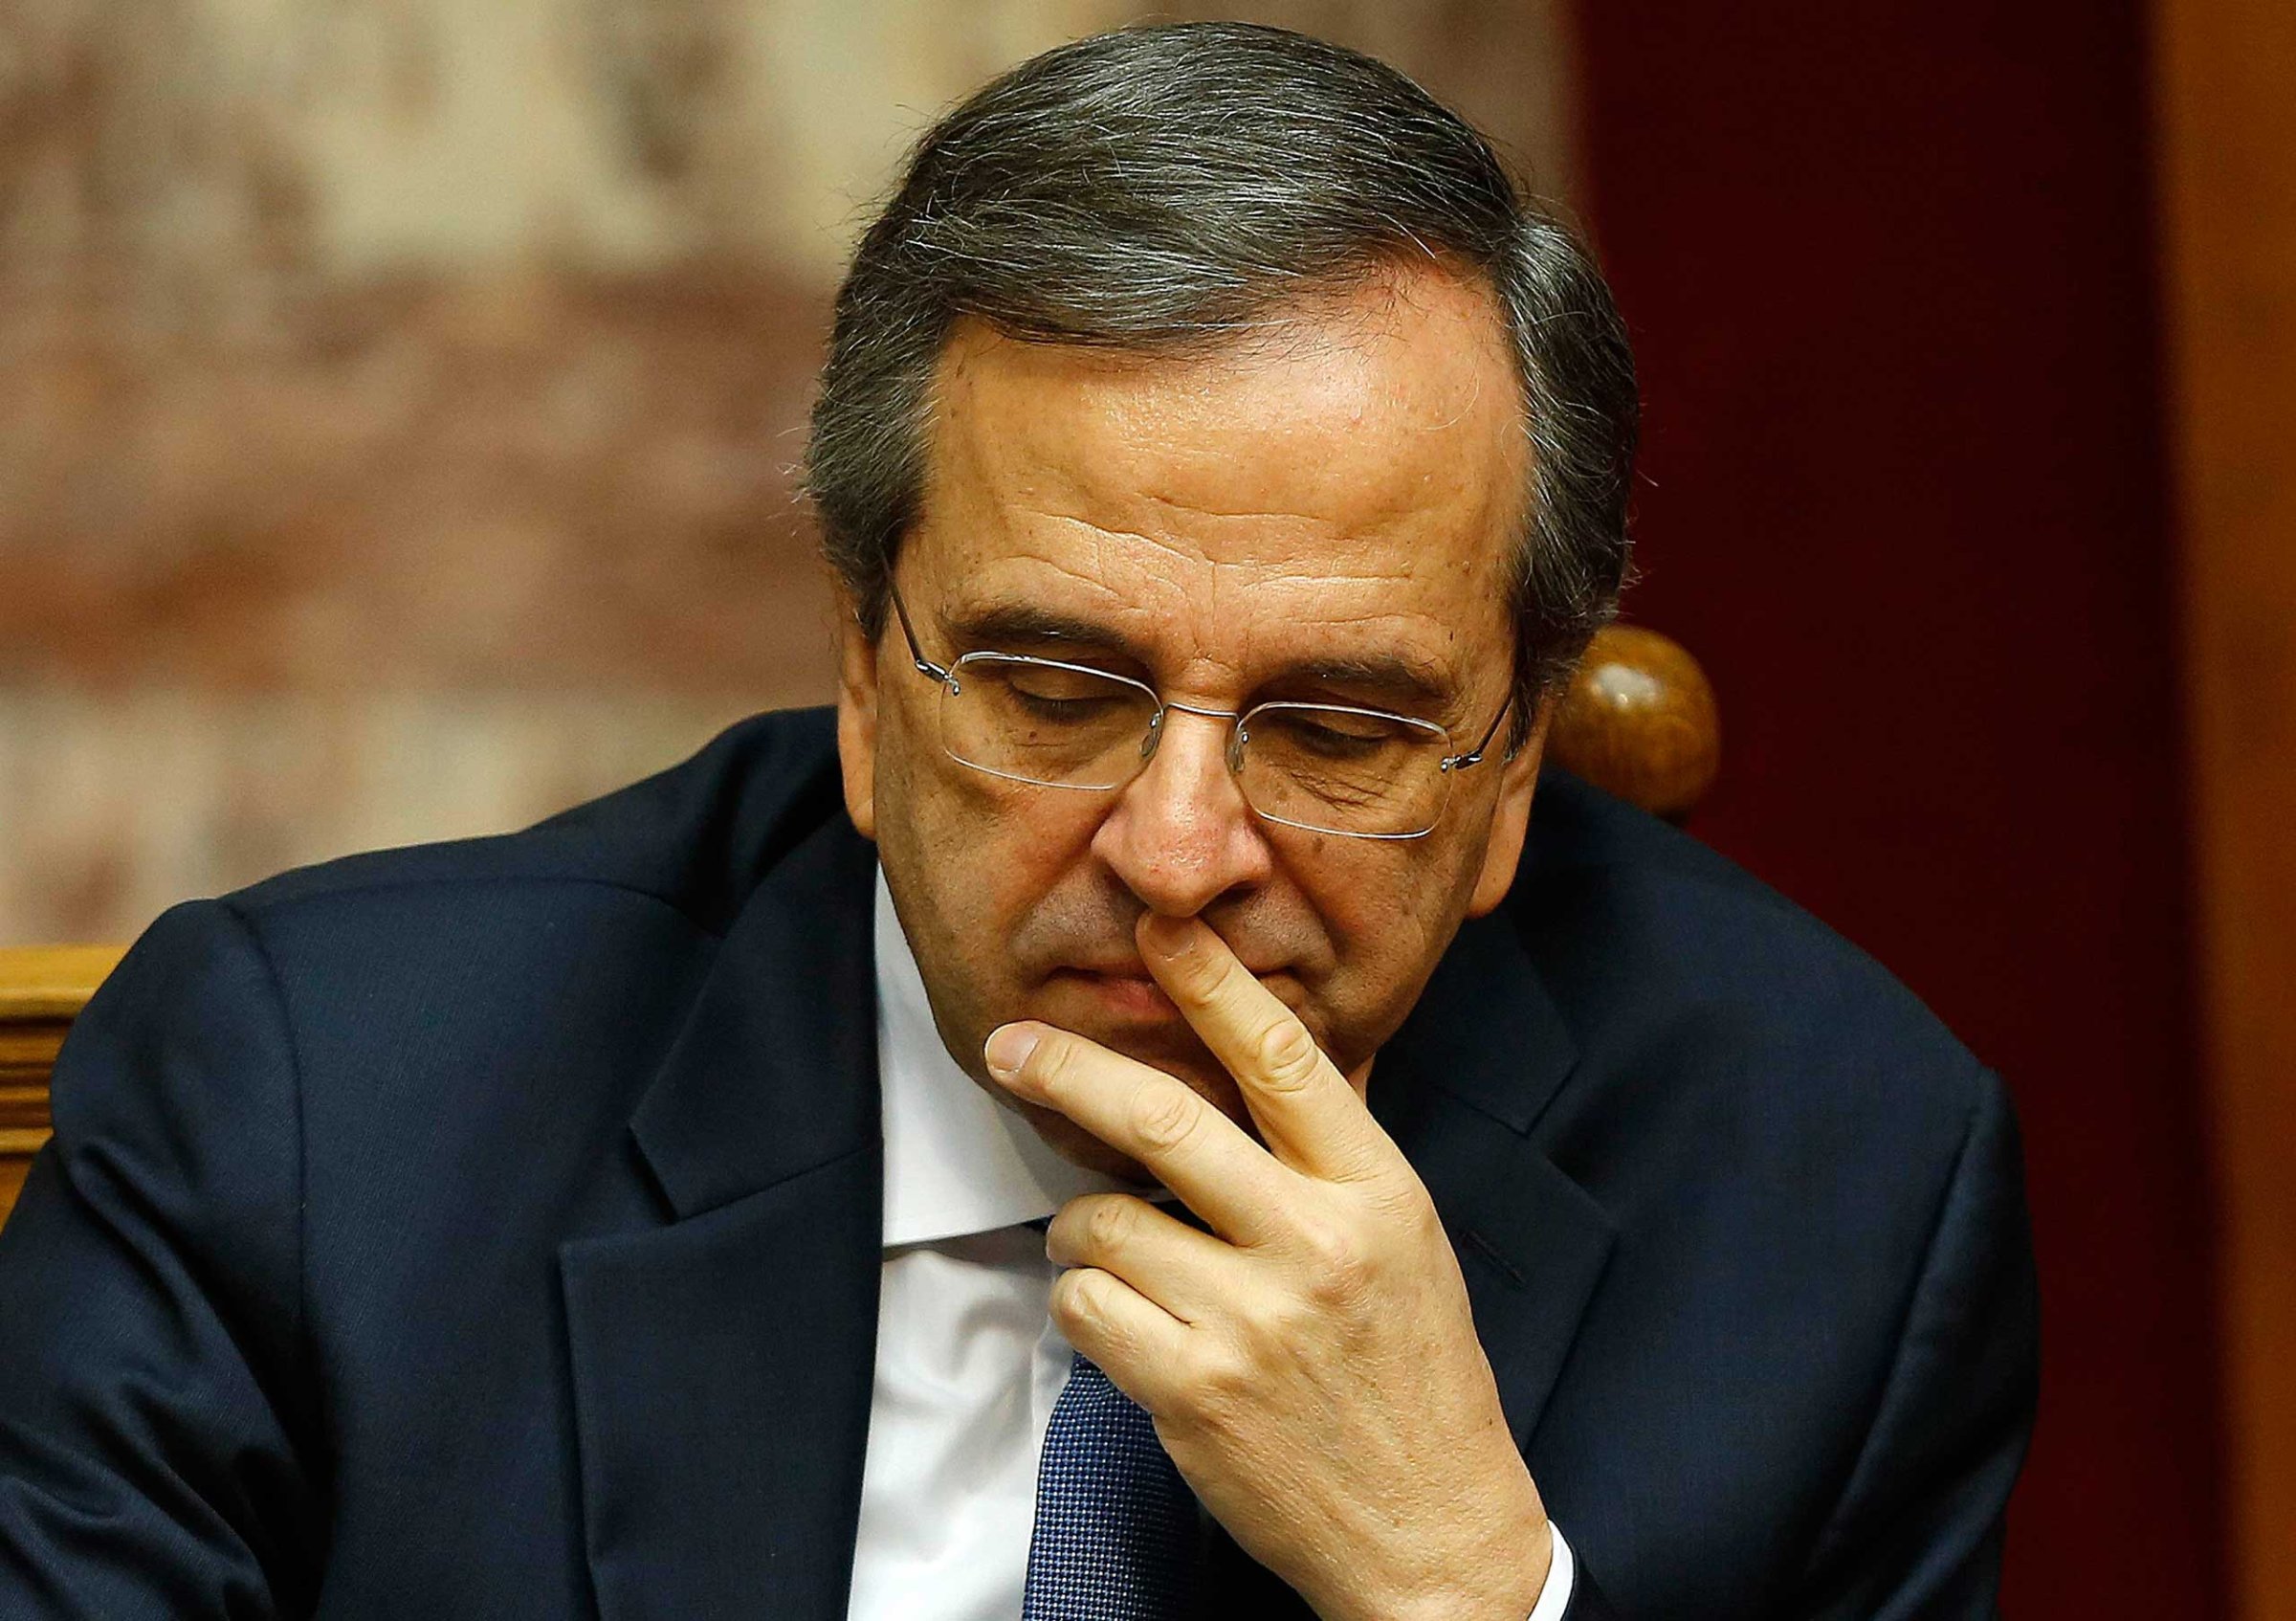 Greek Prime Minister Samaras reacts in parliament during the last round of a presidential vote in Athens